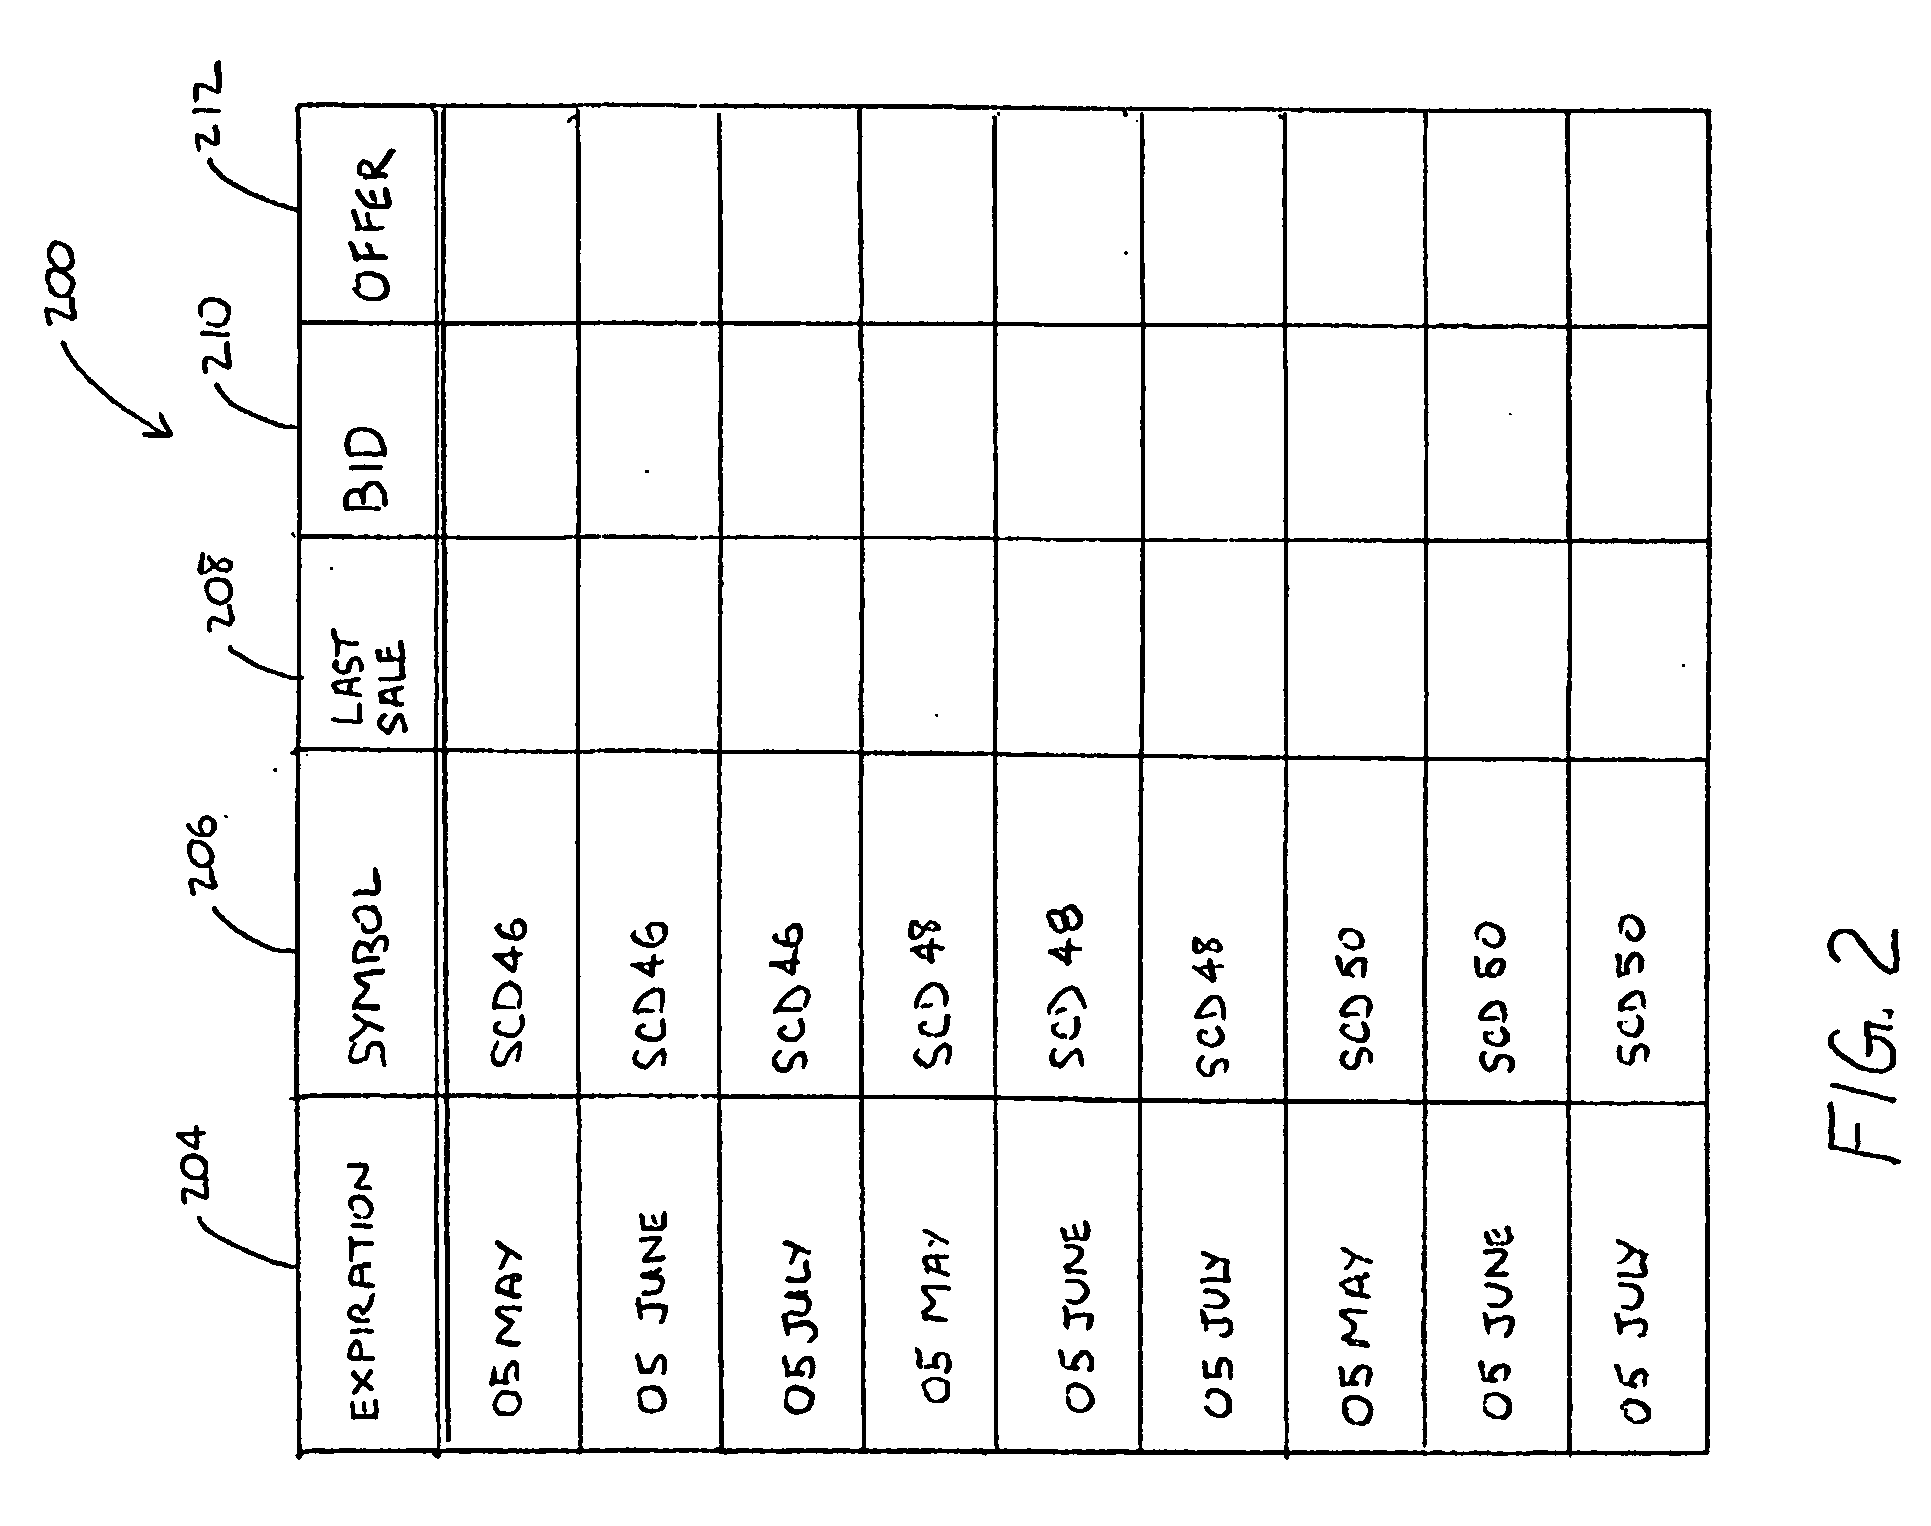 System and method for creating and trading a digital derivative investment instrument